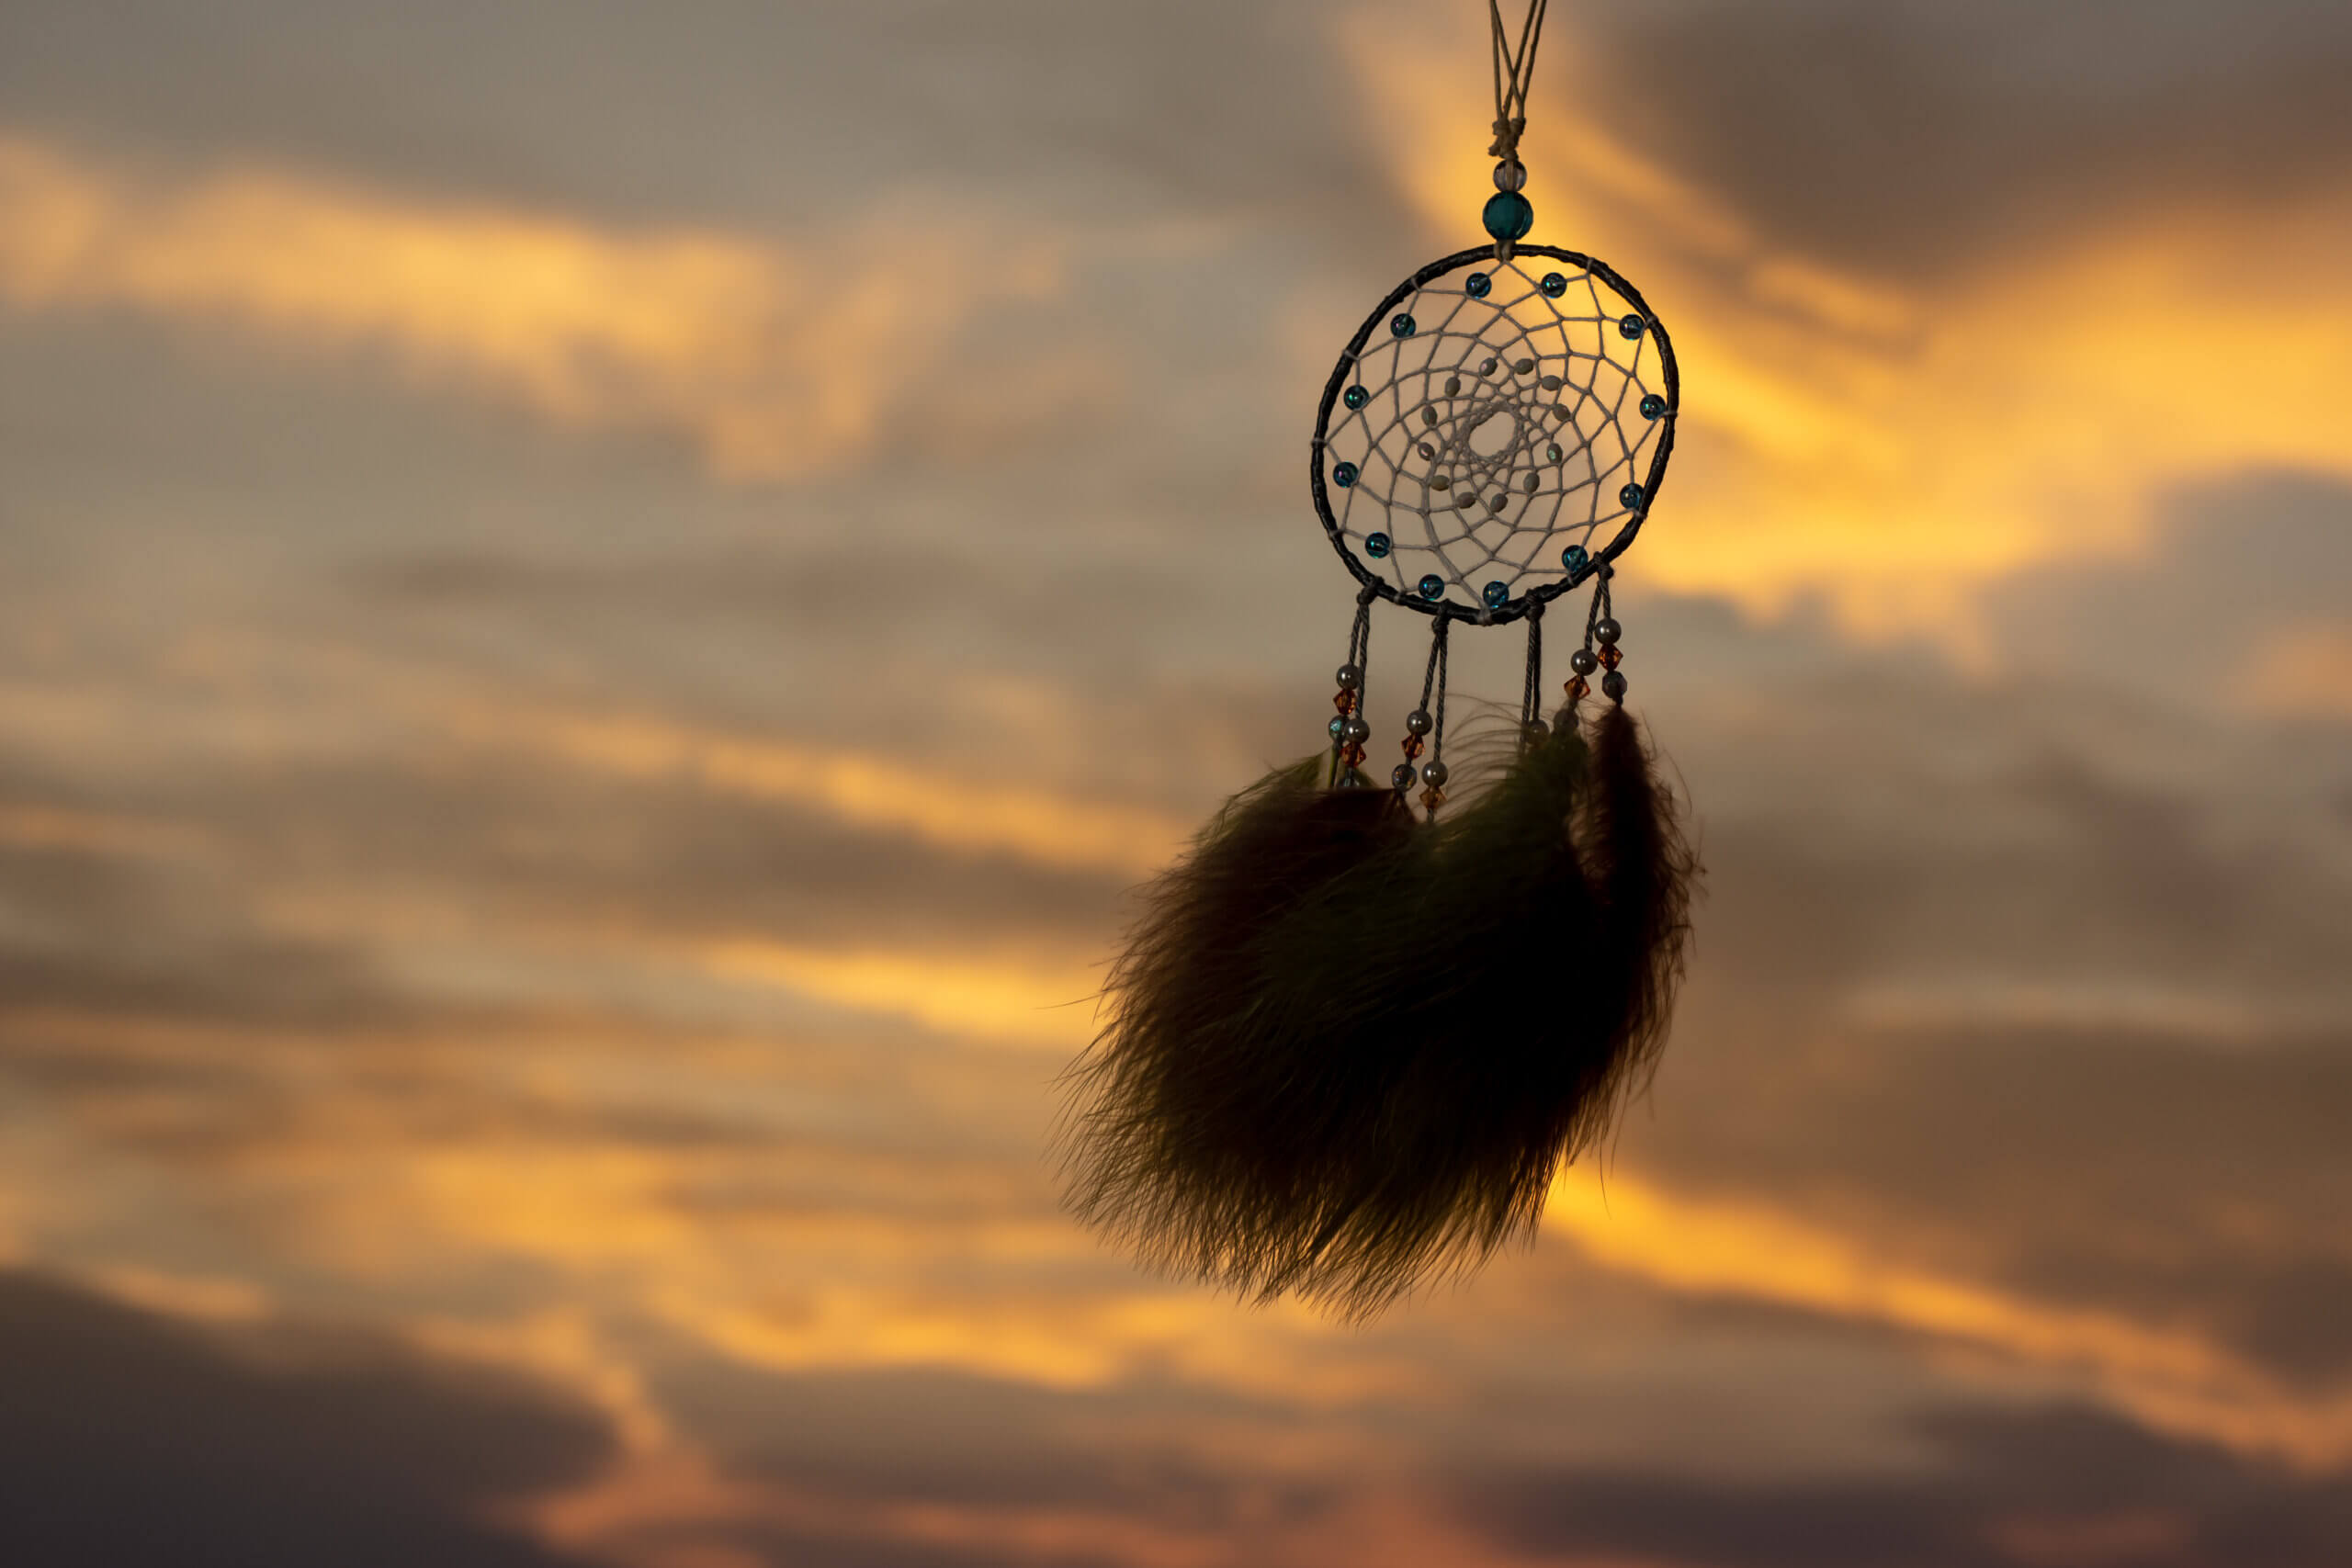 Silhouette of handicraft dream catcher against the breeze and dusk sky